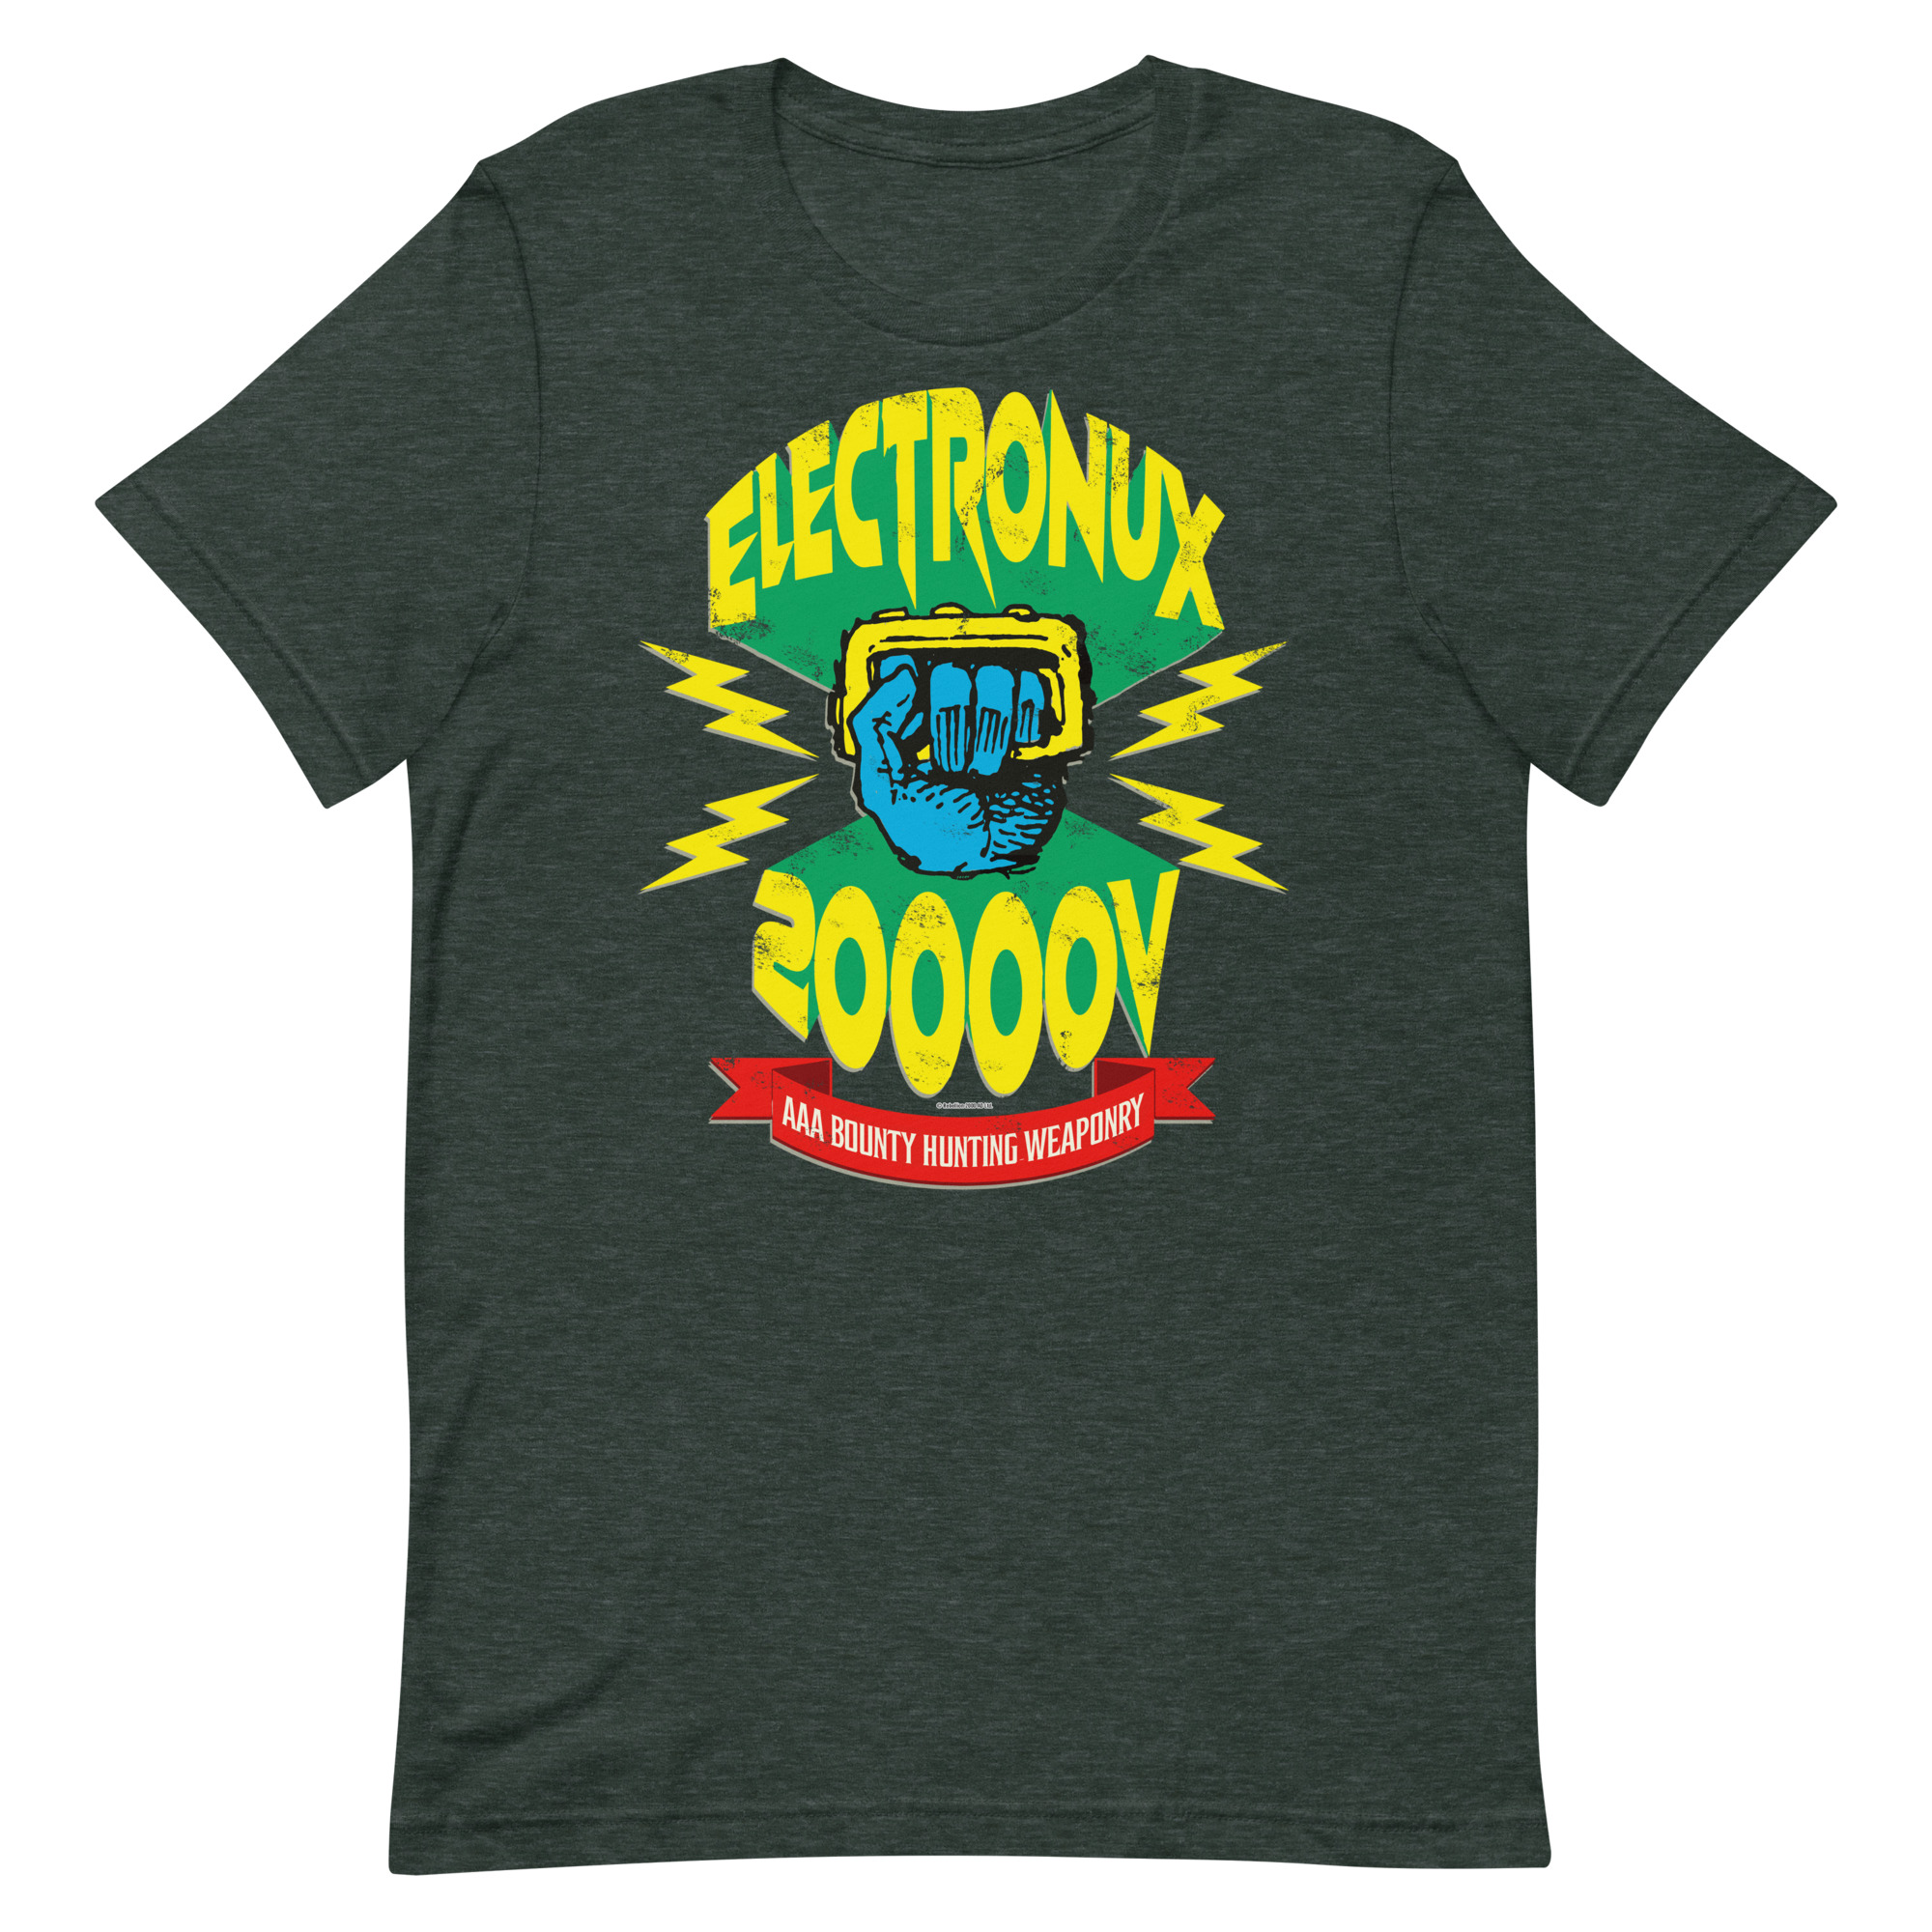 Green Tshirt with a design of Johnny Alpha's elctroknuckles and the words 